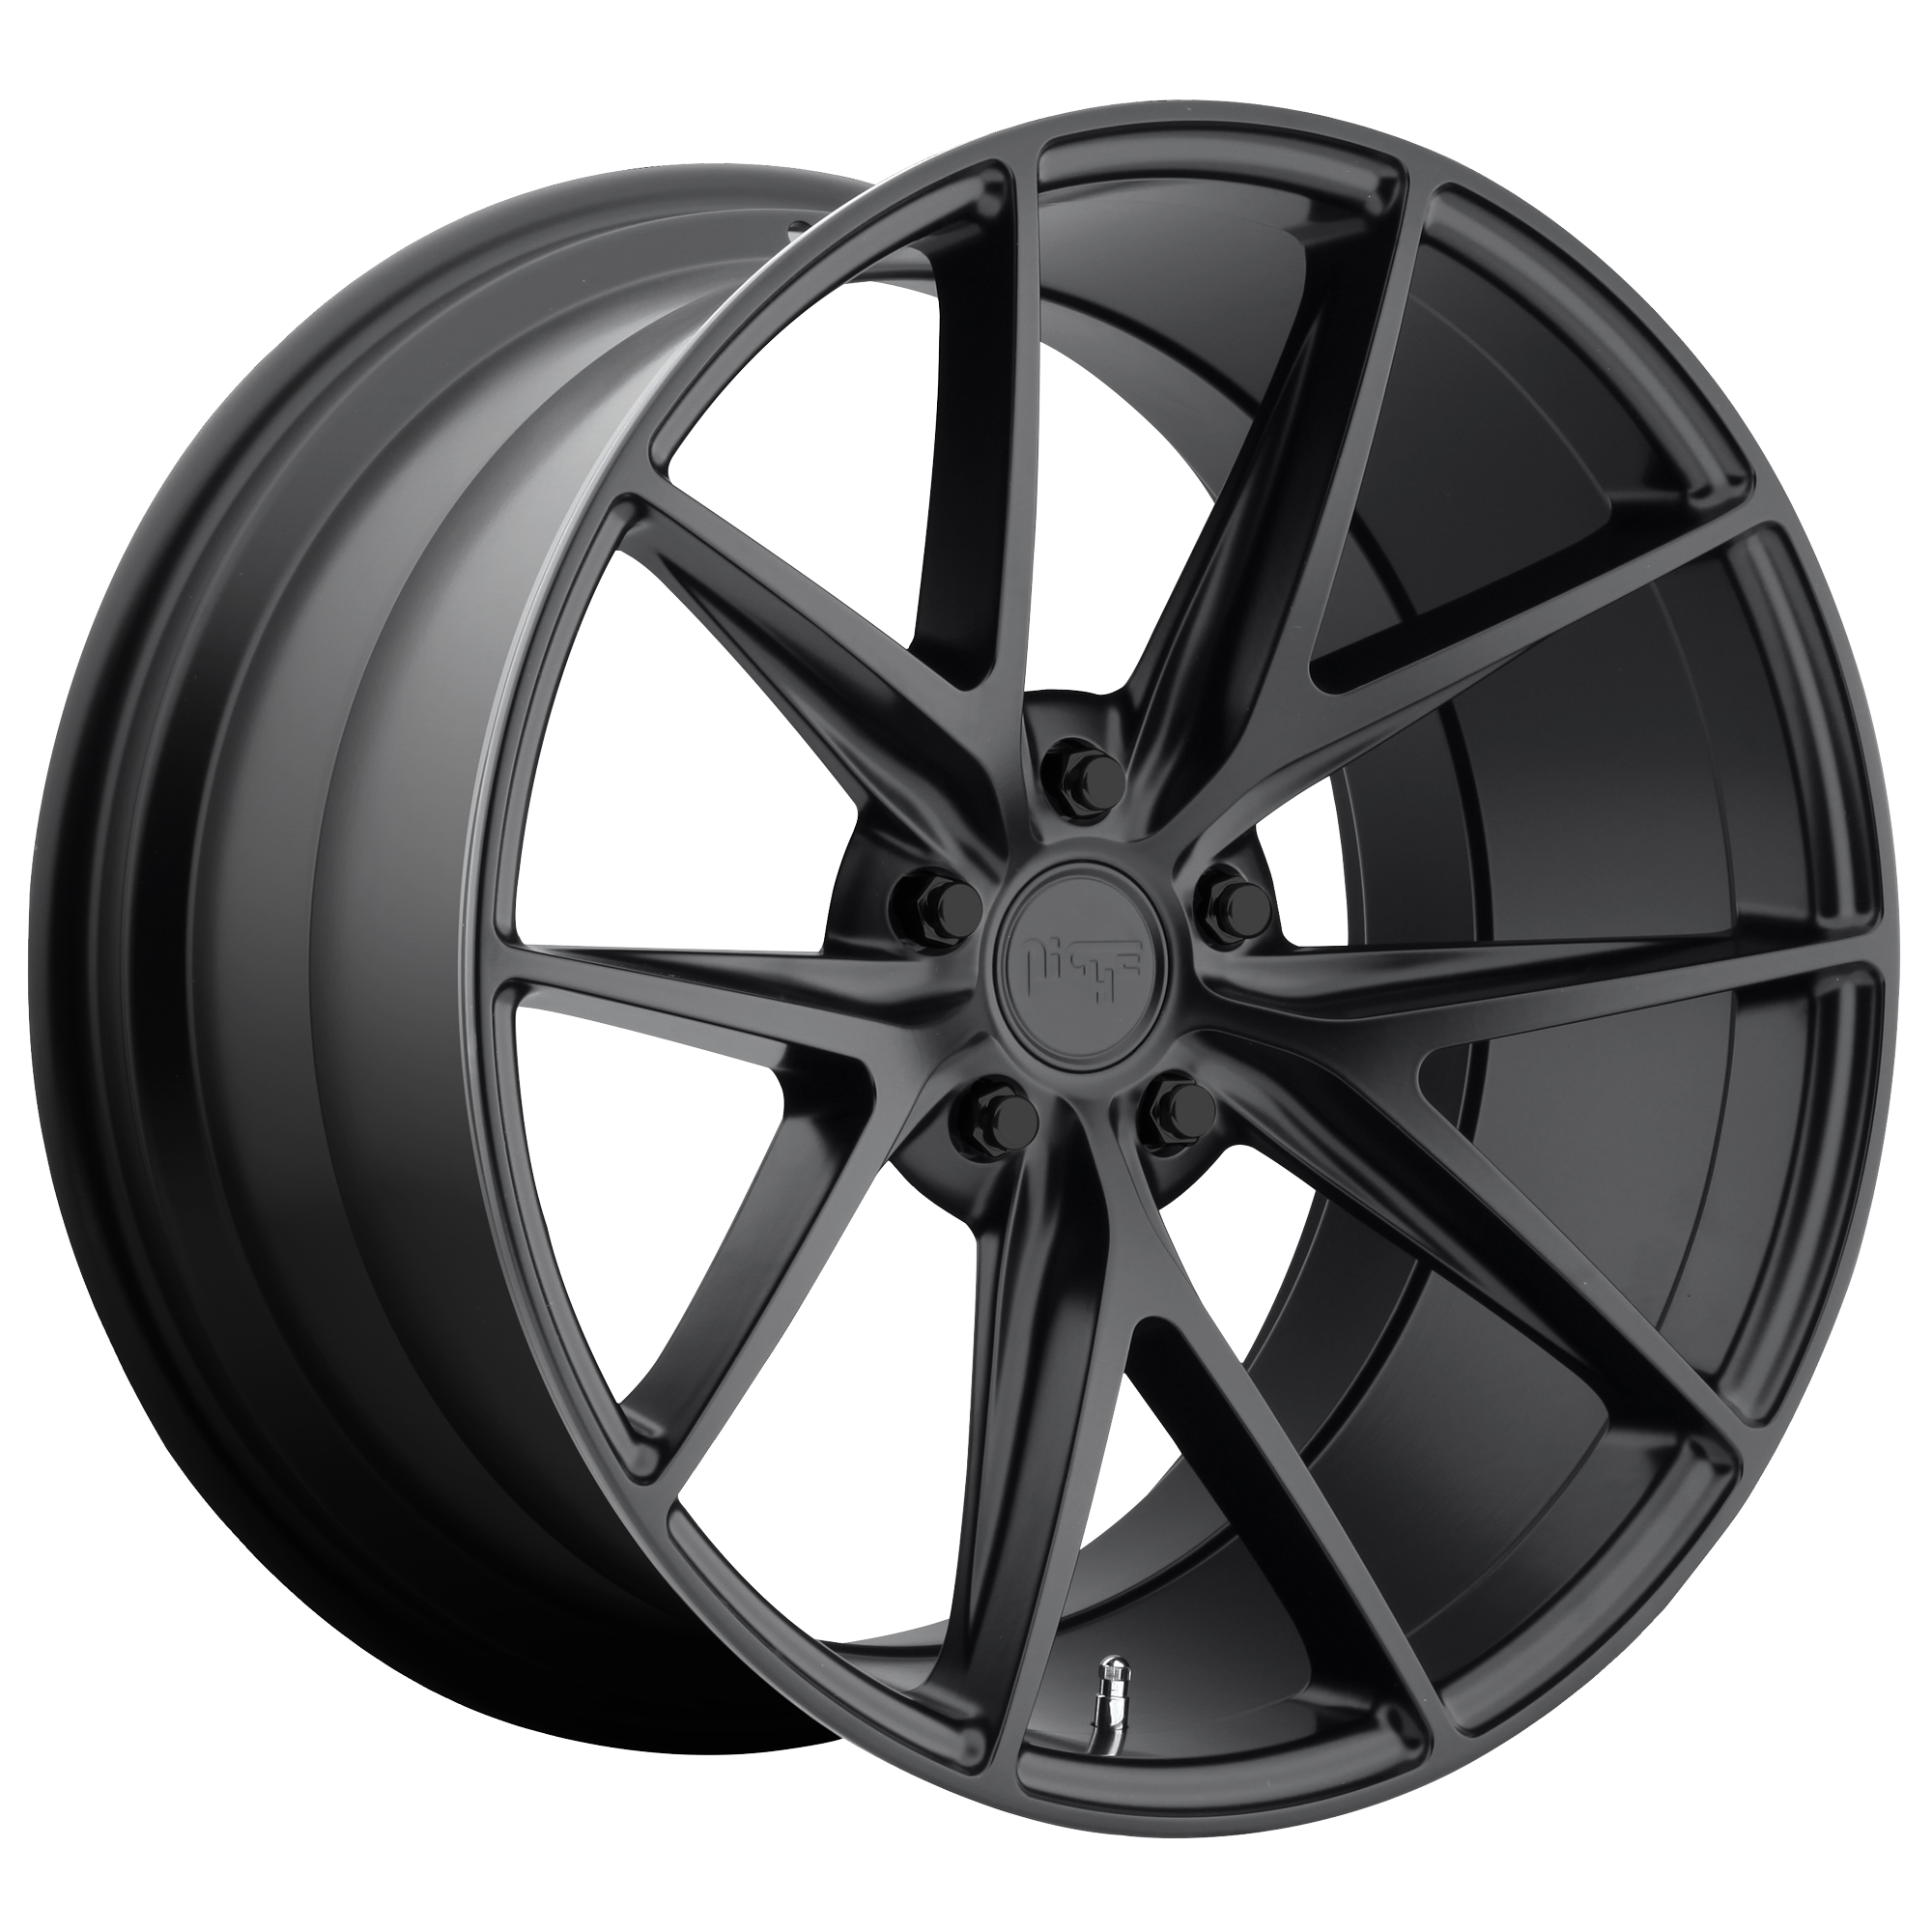 MISANO 18x8 5x110.00 MATTE BLACK (40 mm) - Tires and Engine Performance